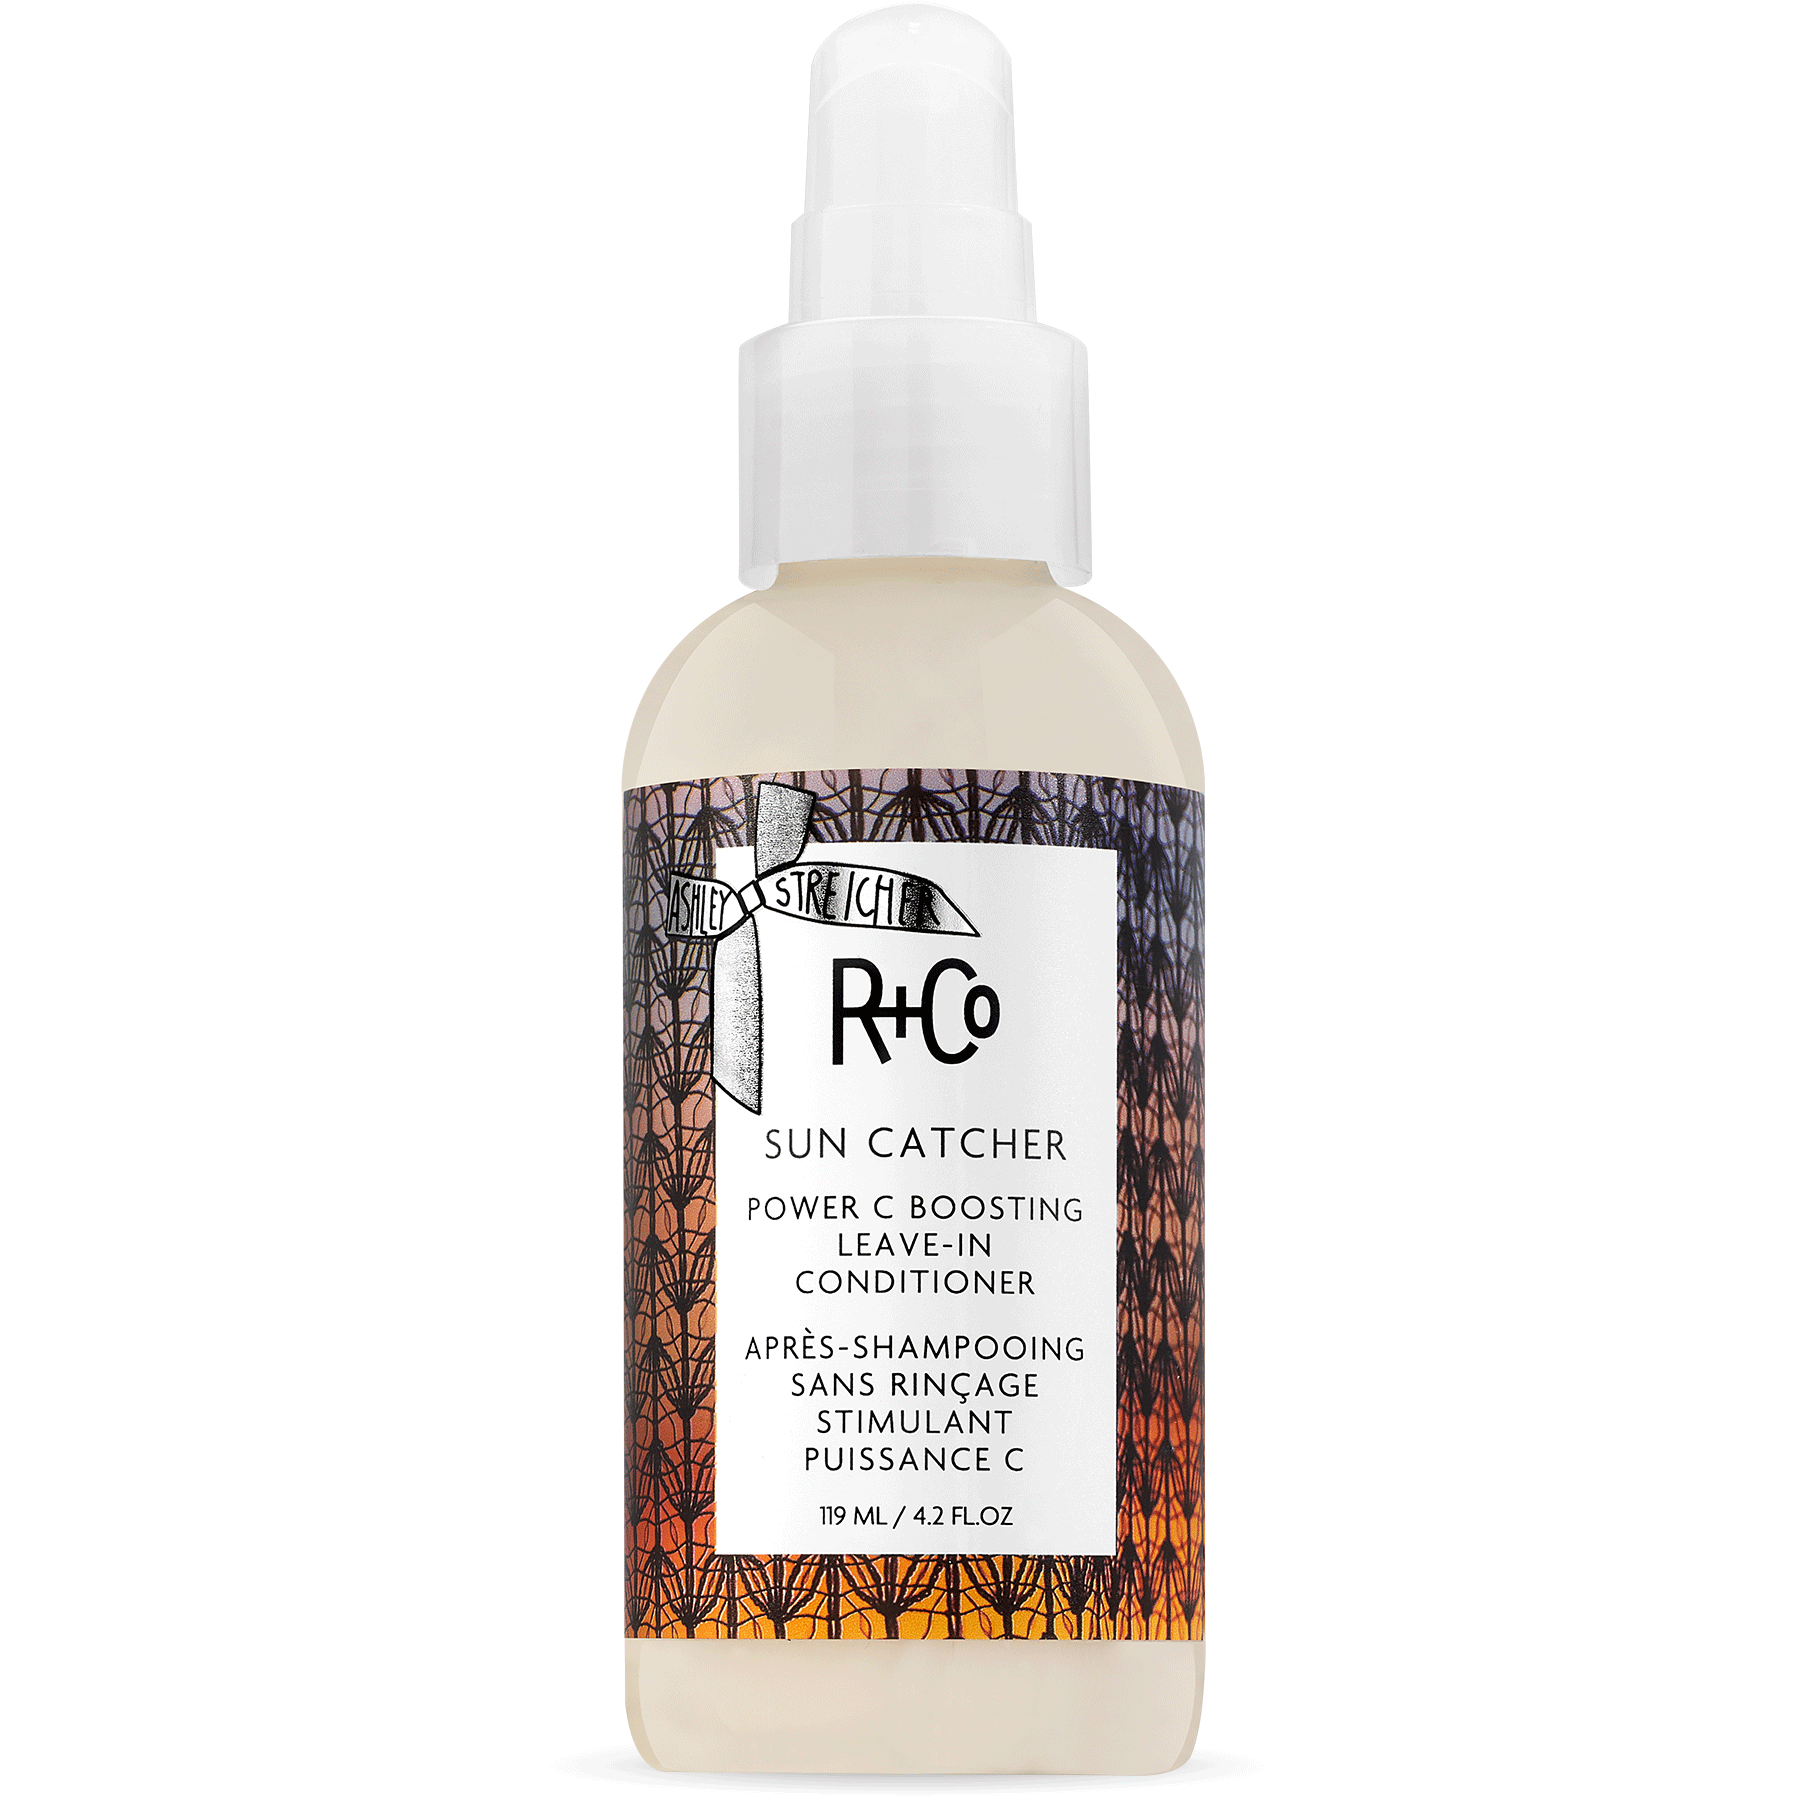 R+CO Sun Catcher Power C Boosting Leave-In Conditioner (119 ml)